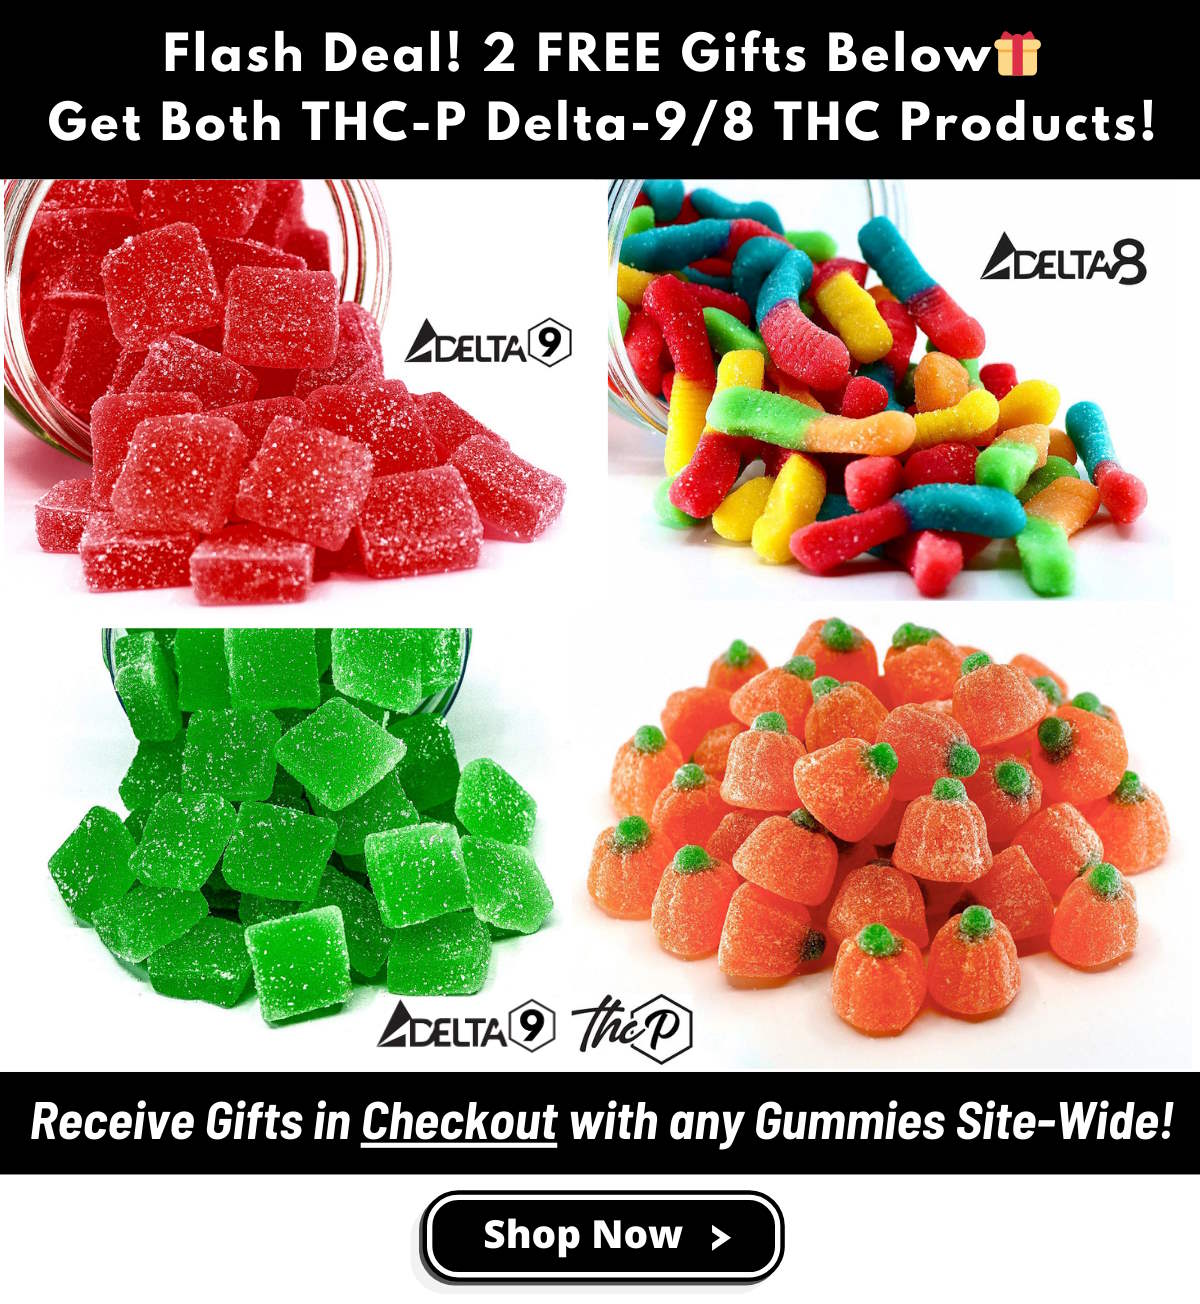 2 Free THCP or Delta-9 Gummies Products with Any Gummies in Checkout